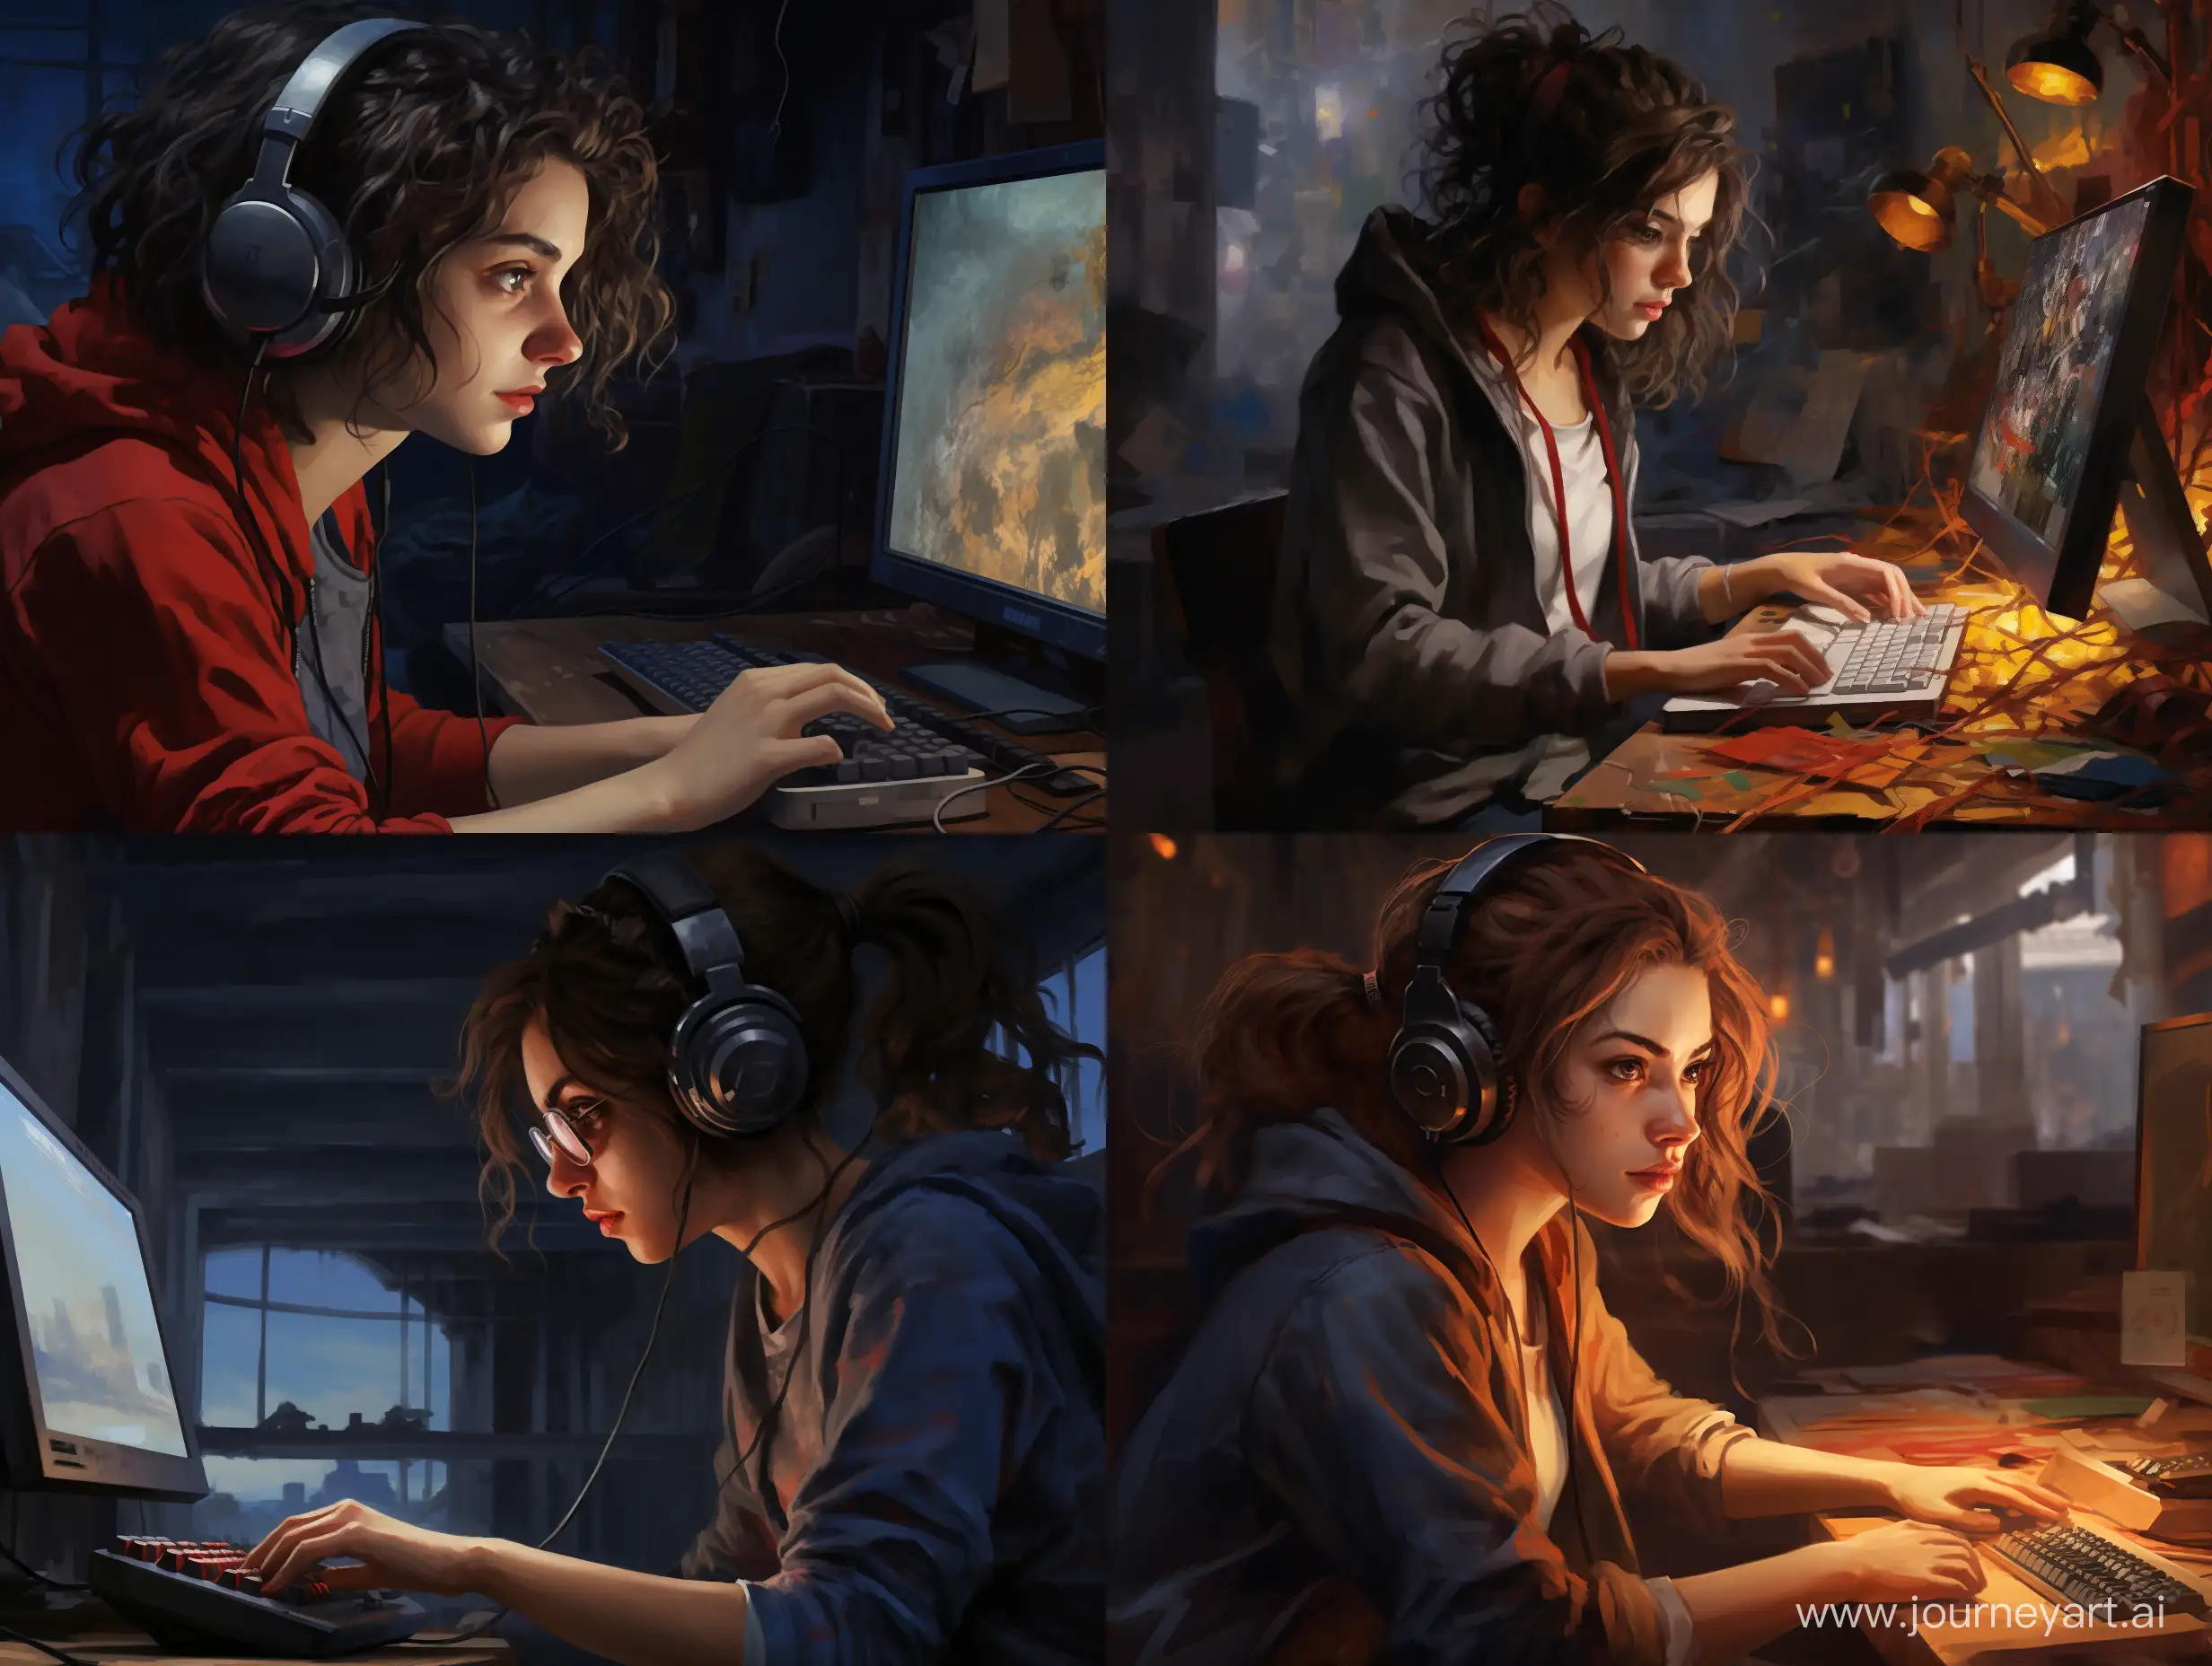 Academic-Painting-of-a-Girl-Gamer-Engrossed-in-Computer-Play